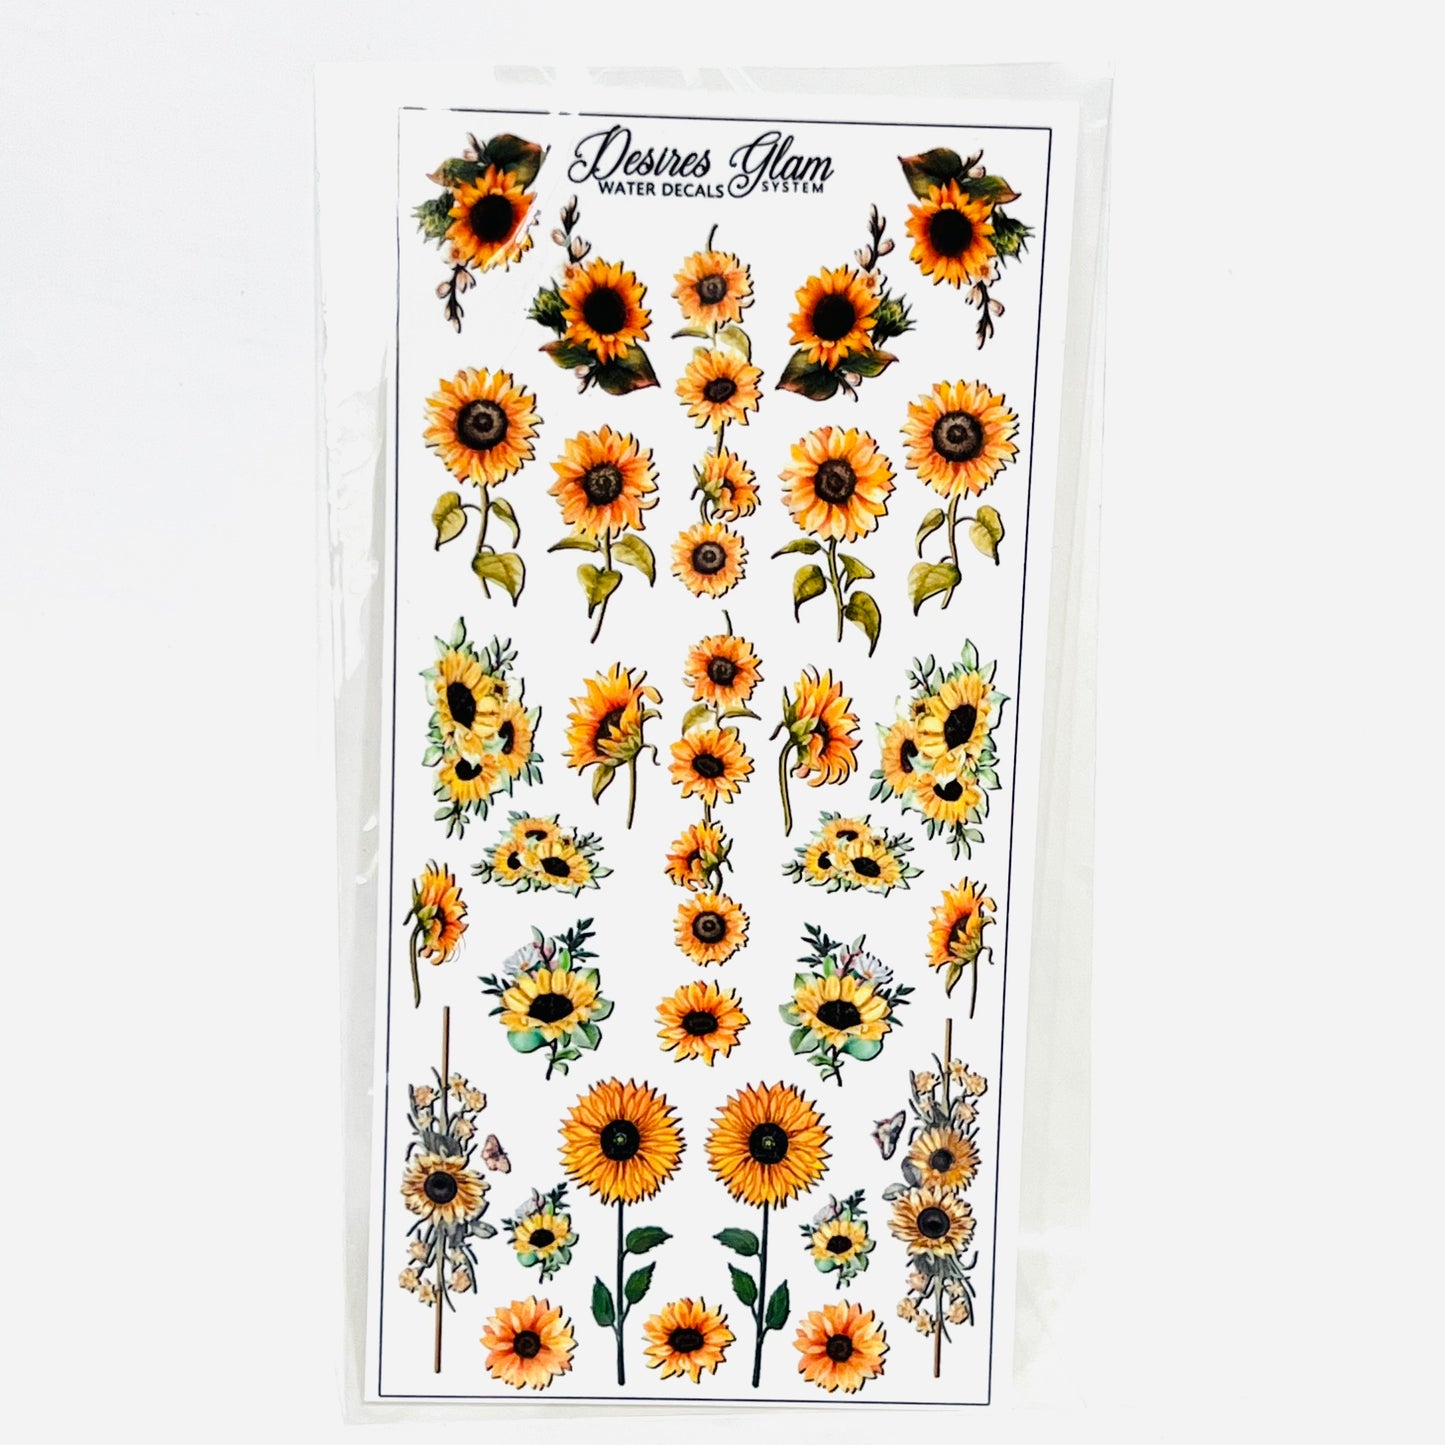 Sunflowers 2 Flowers Water decals